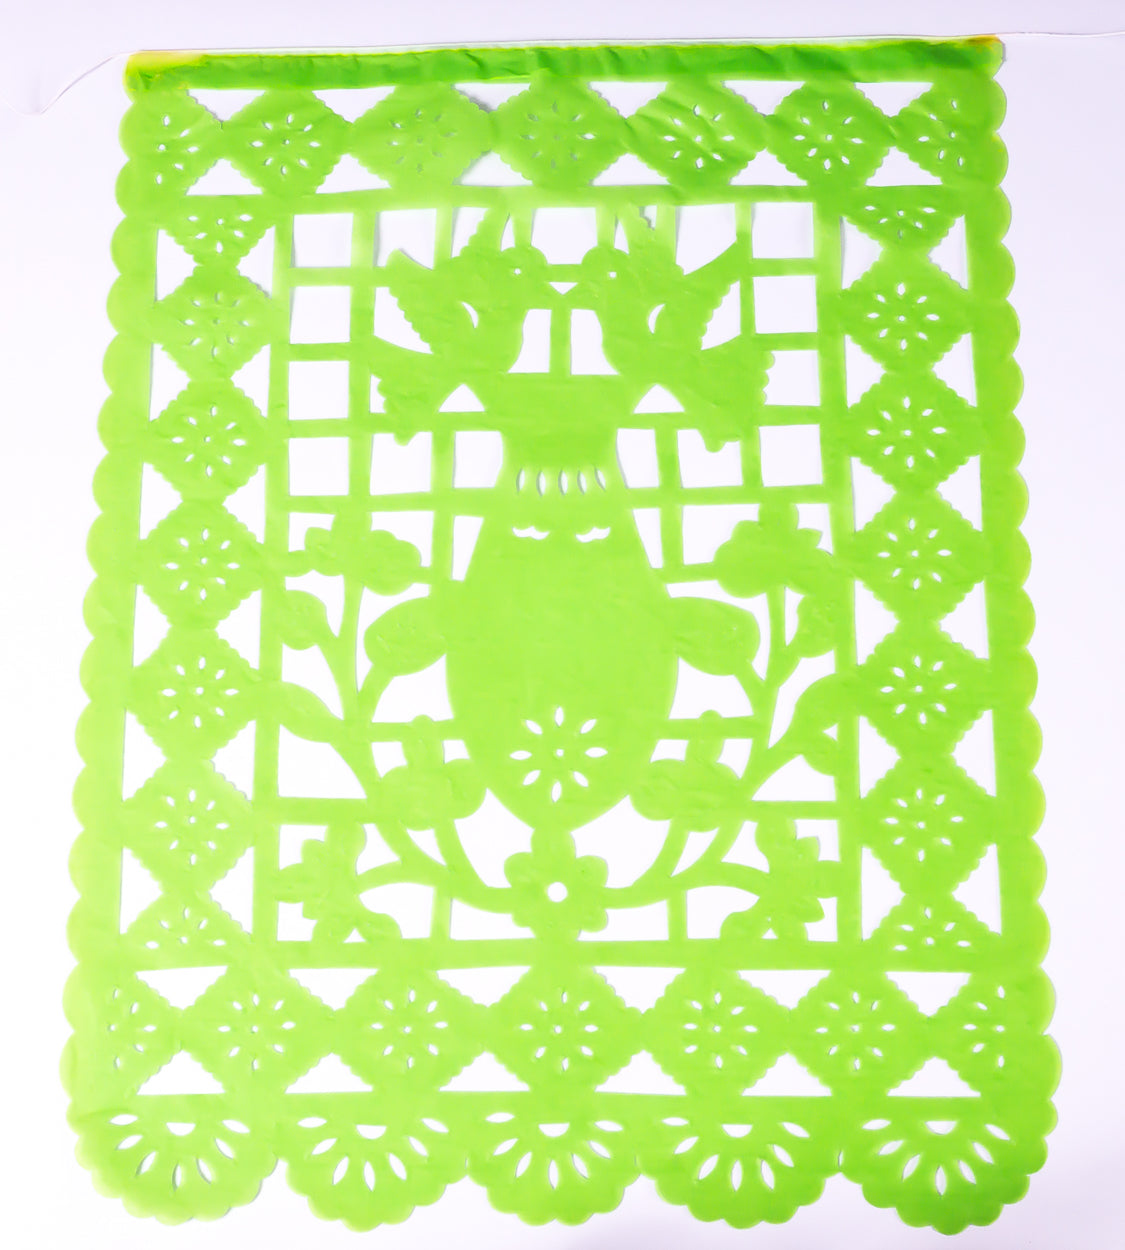 Papel Picado Fiesta Decorations Mexican Bunting With Tall Flags